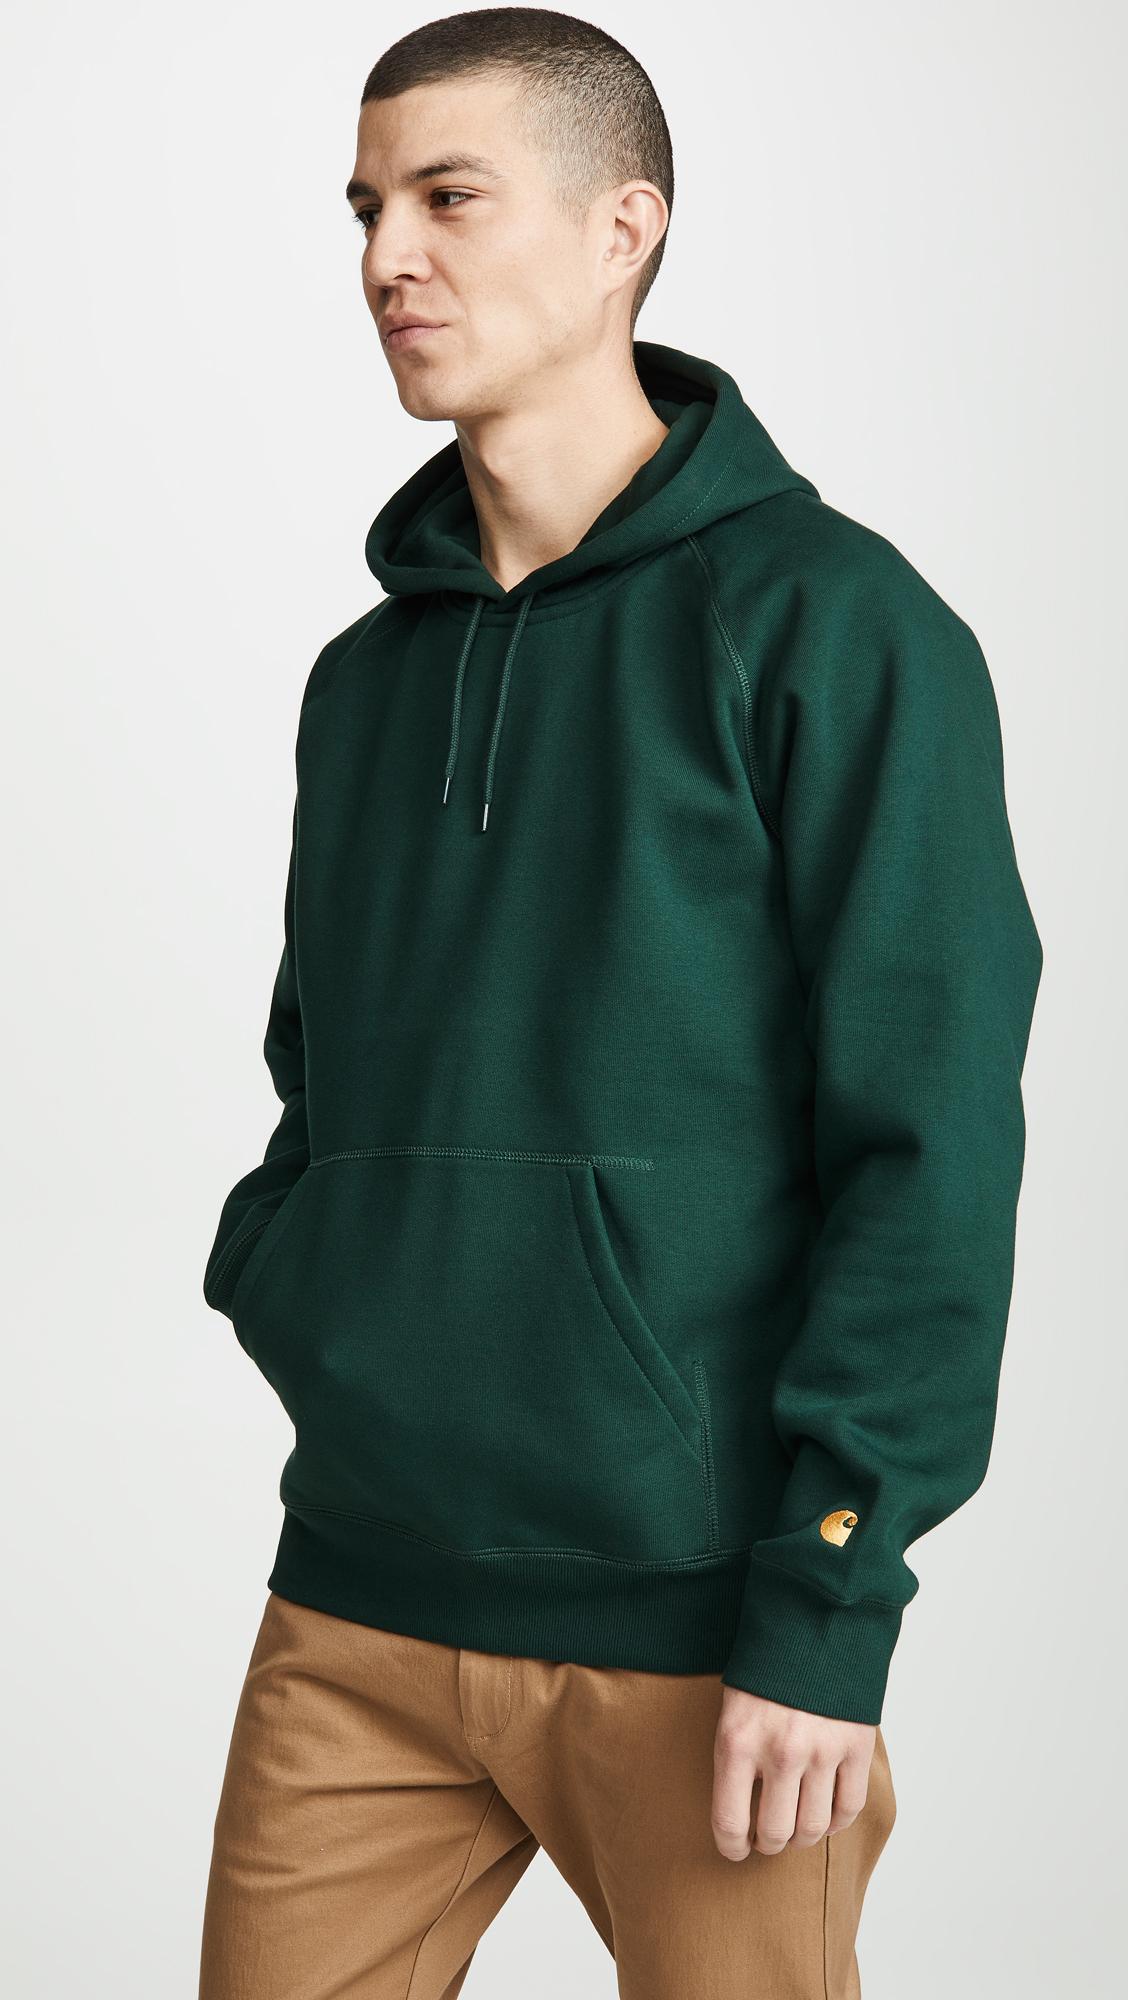 Carhartt WIP Cotton Hooded Chase Jacket in Bottle Green/Gold (Green) for  Men - Lyst